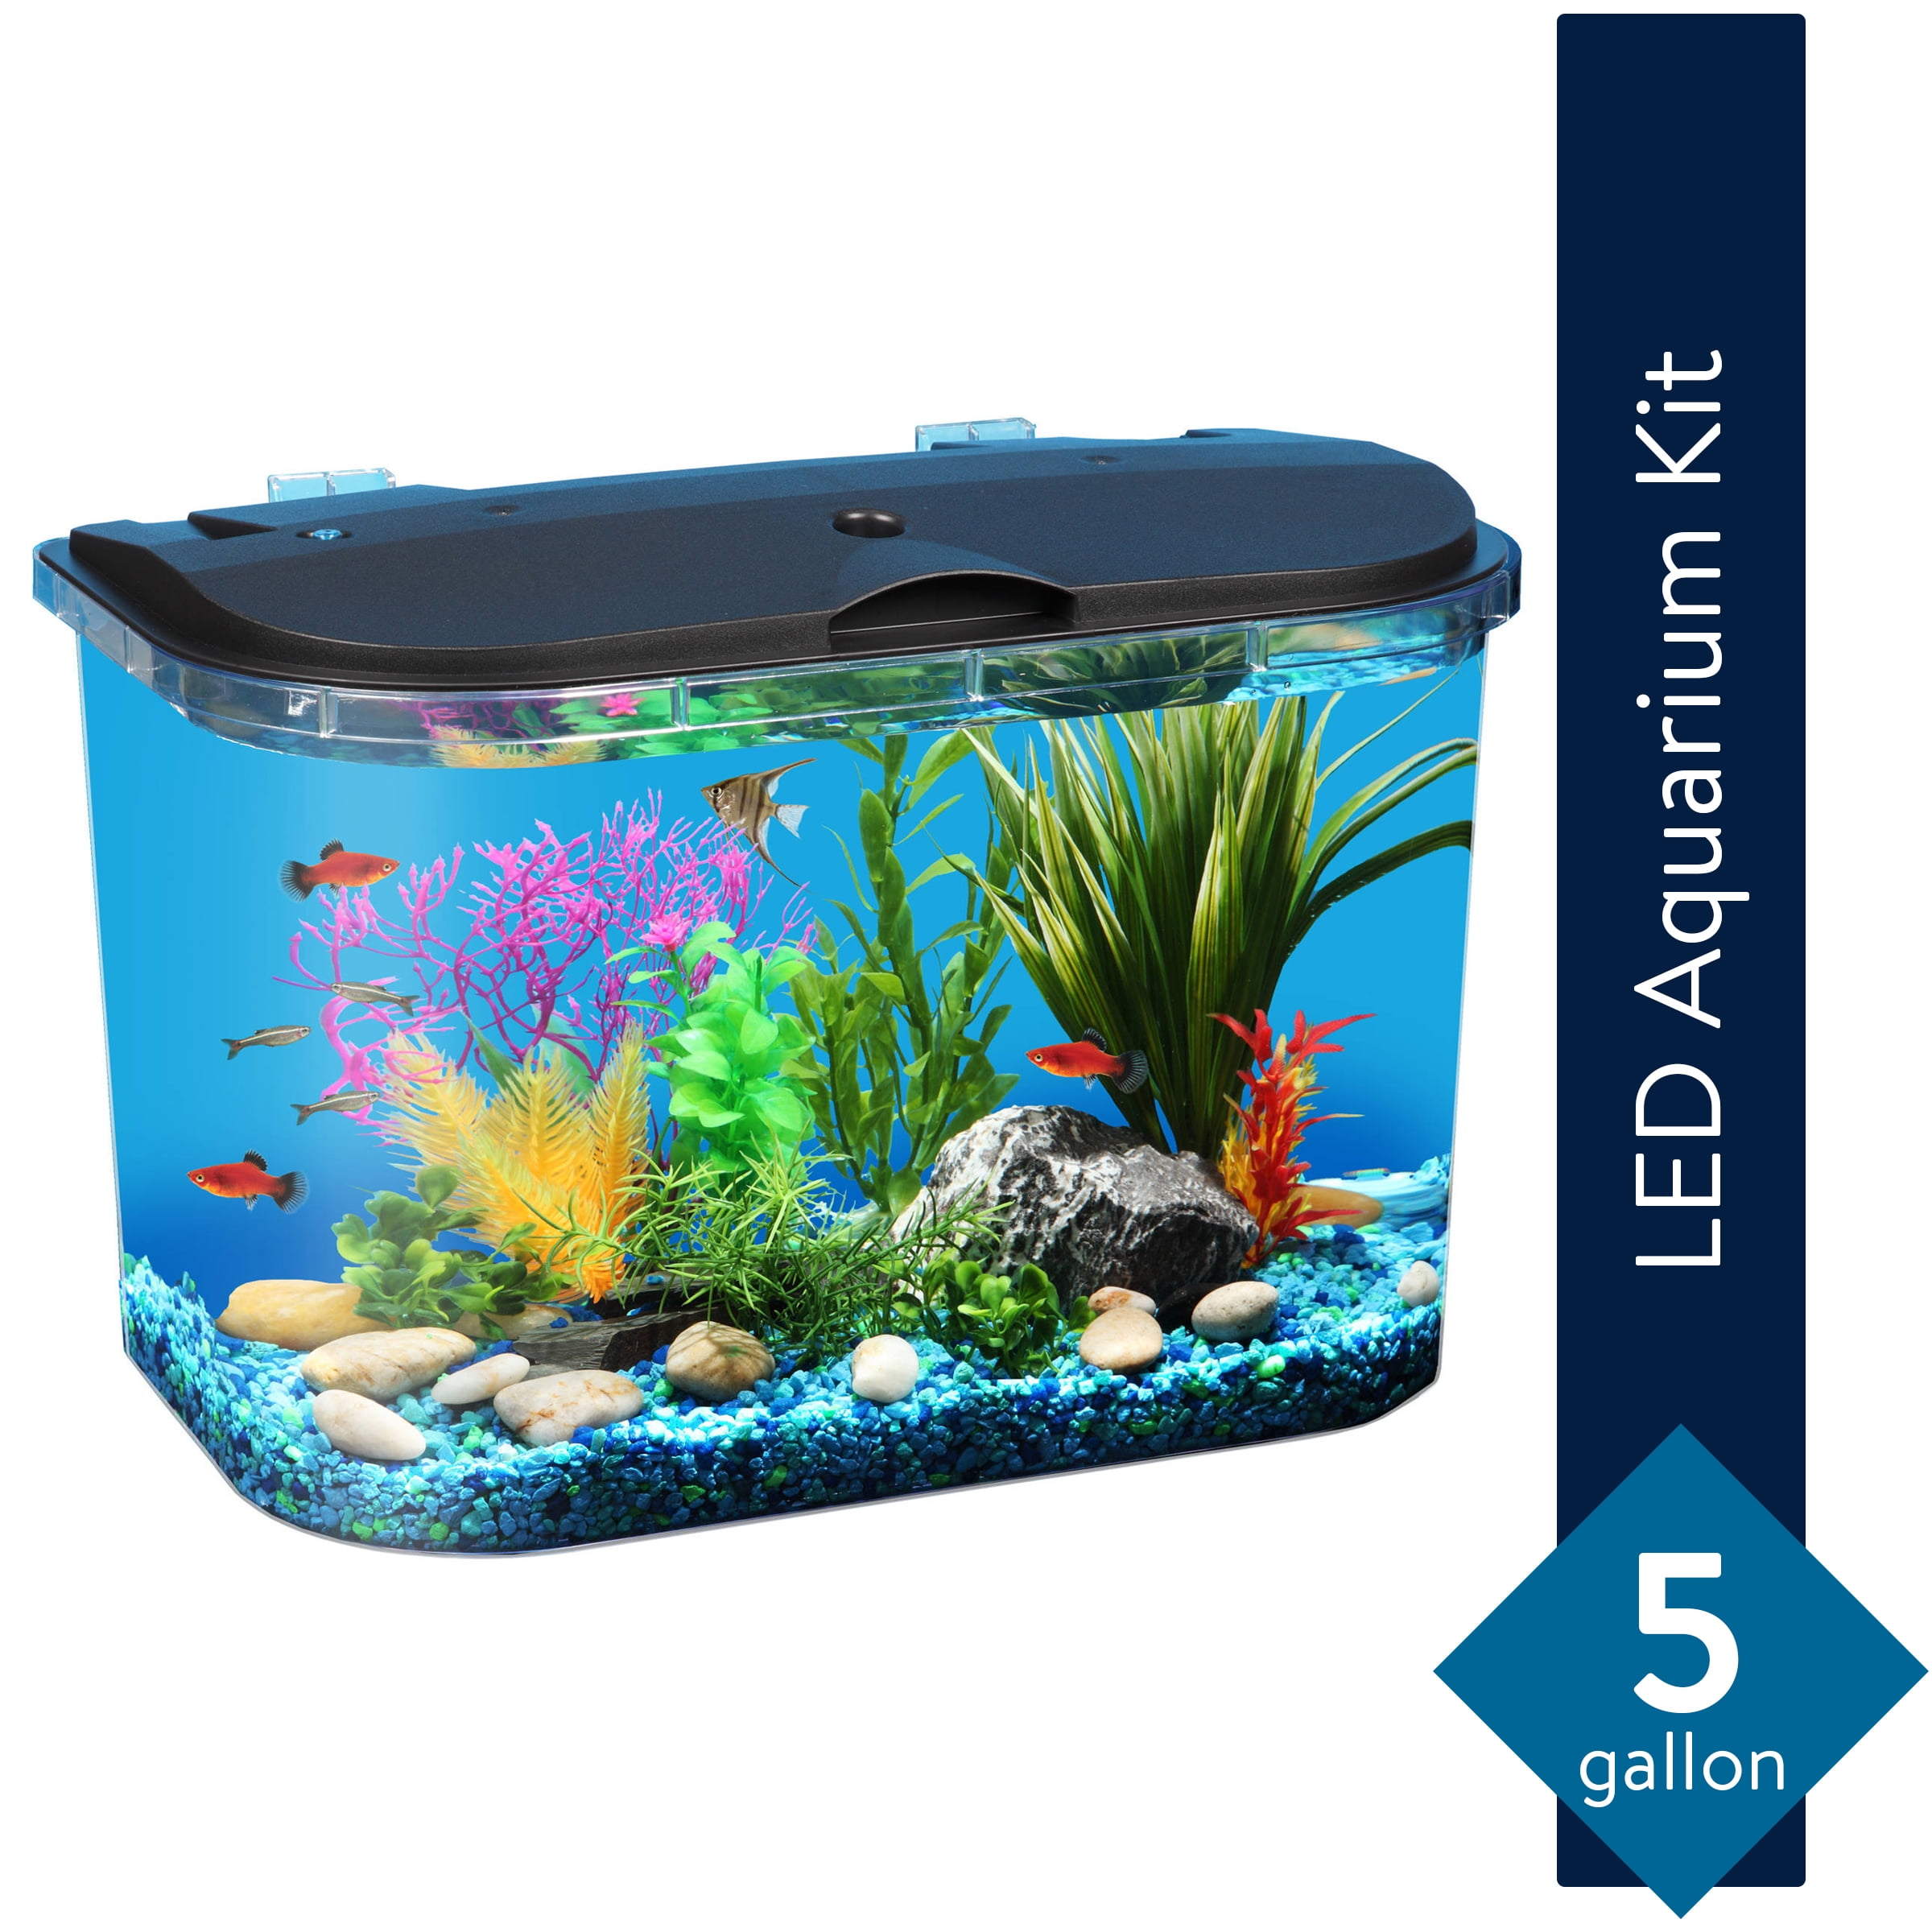 dosis antwoord Keizer KollerCraft 5-Gallon Aquarium Kit with LED Lighting and Power Filter, Ideal  for a Variety of Tropical Fish - Walmart.com